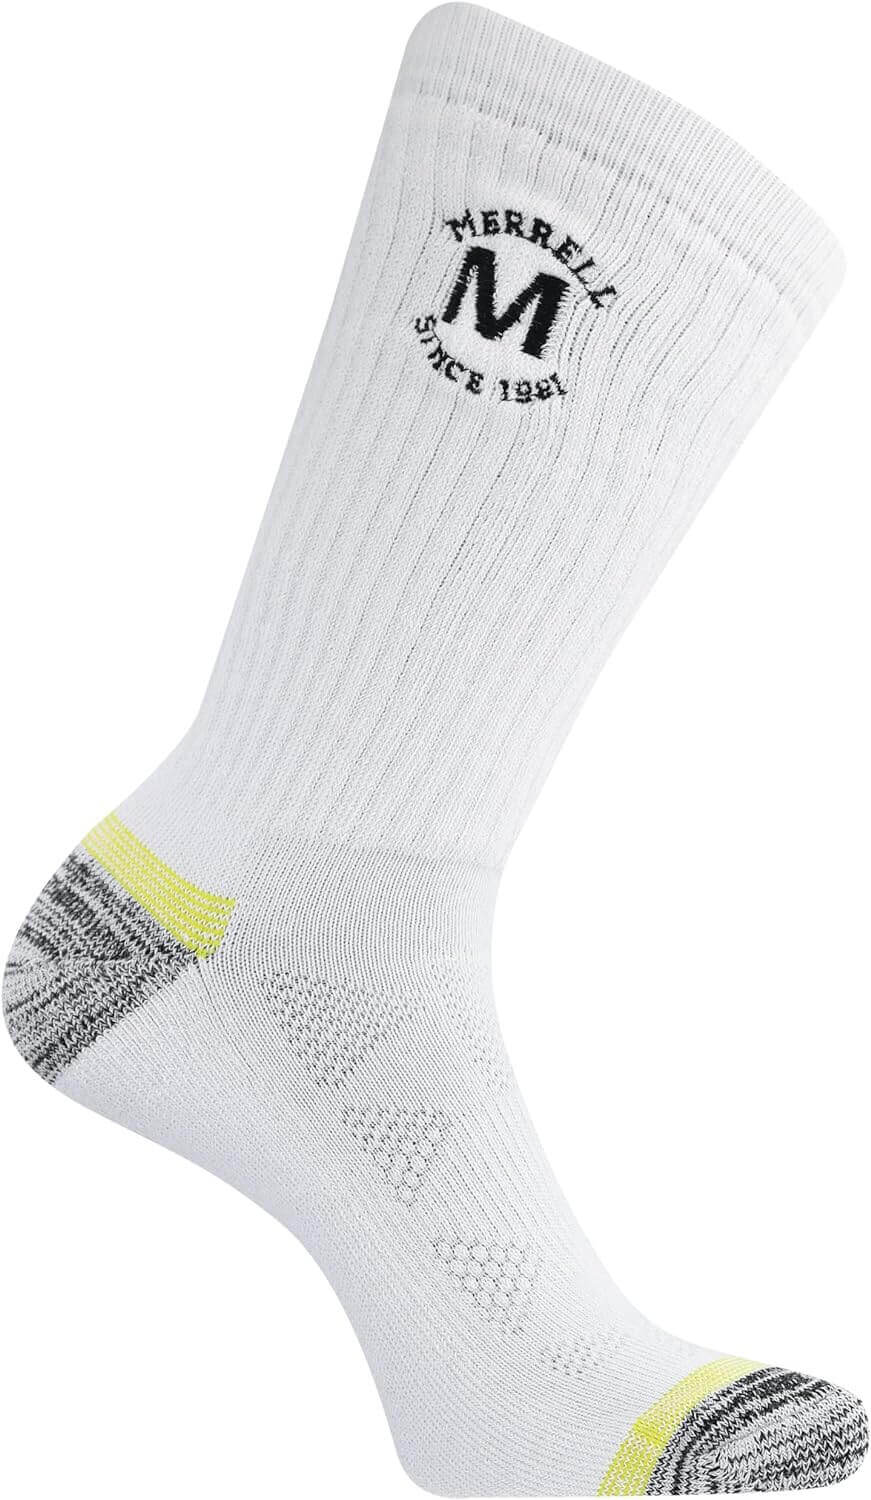 Shop The Latest >Merrell Men's and Women's Moab Hiking Mid Cushion Socks > *Only $23.79*> From The Top Brand > *Merrelll* > Shop Now and Get Free Shipping On Orders Over $45.00 >*Shop Earth Foot*